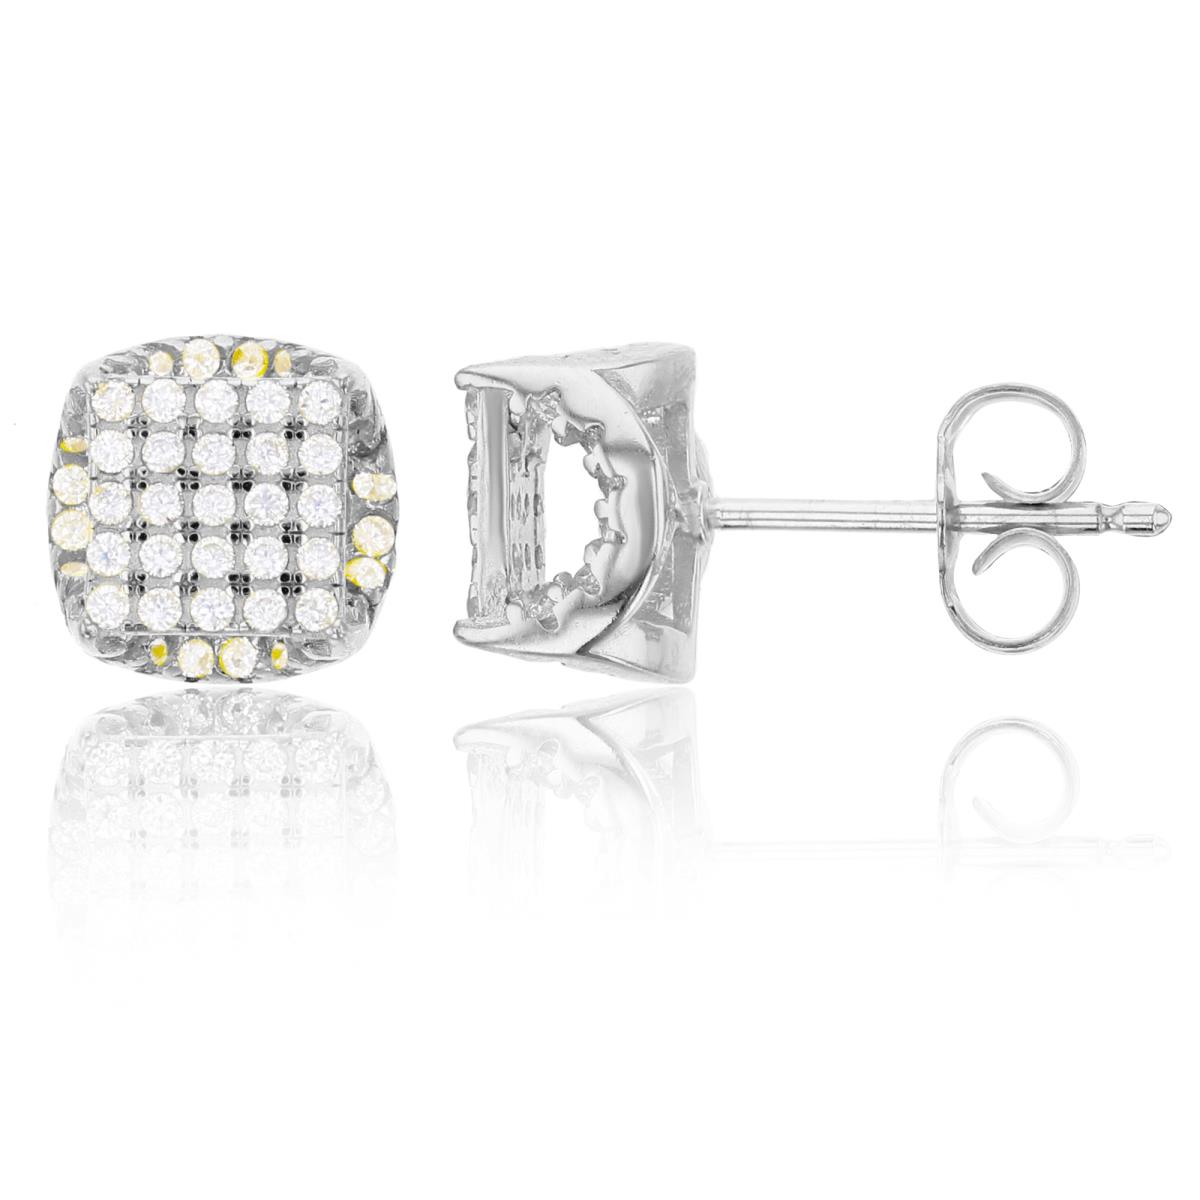 Sterling Silver 9mm Micropave 3D Square Stud Earring